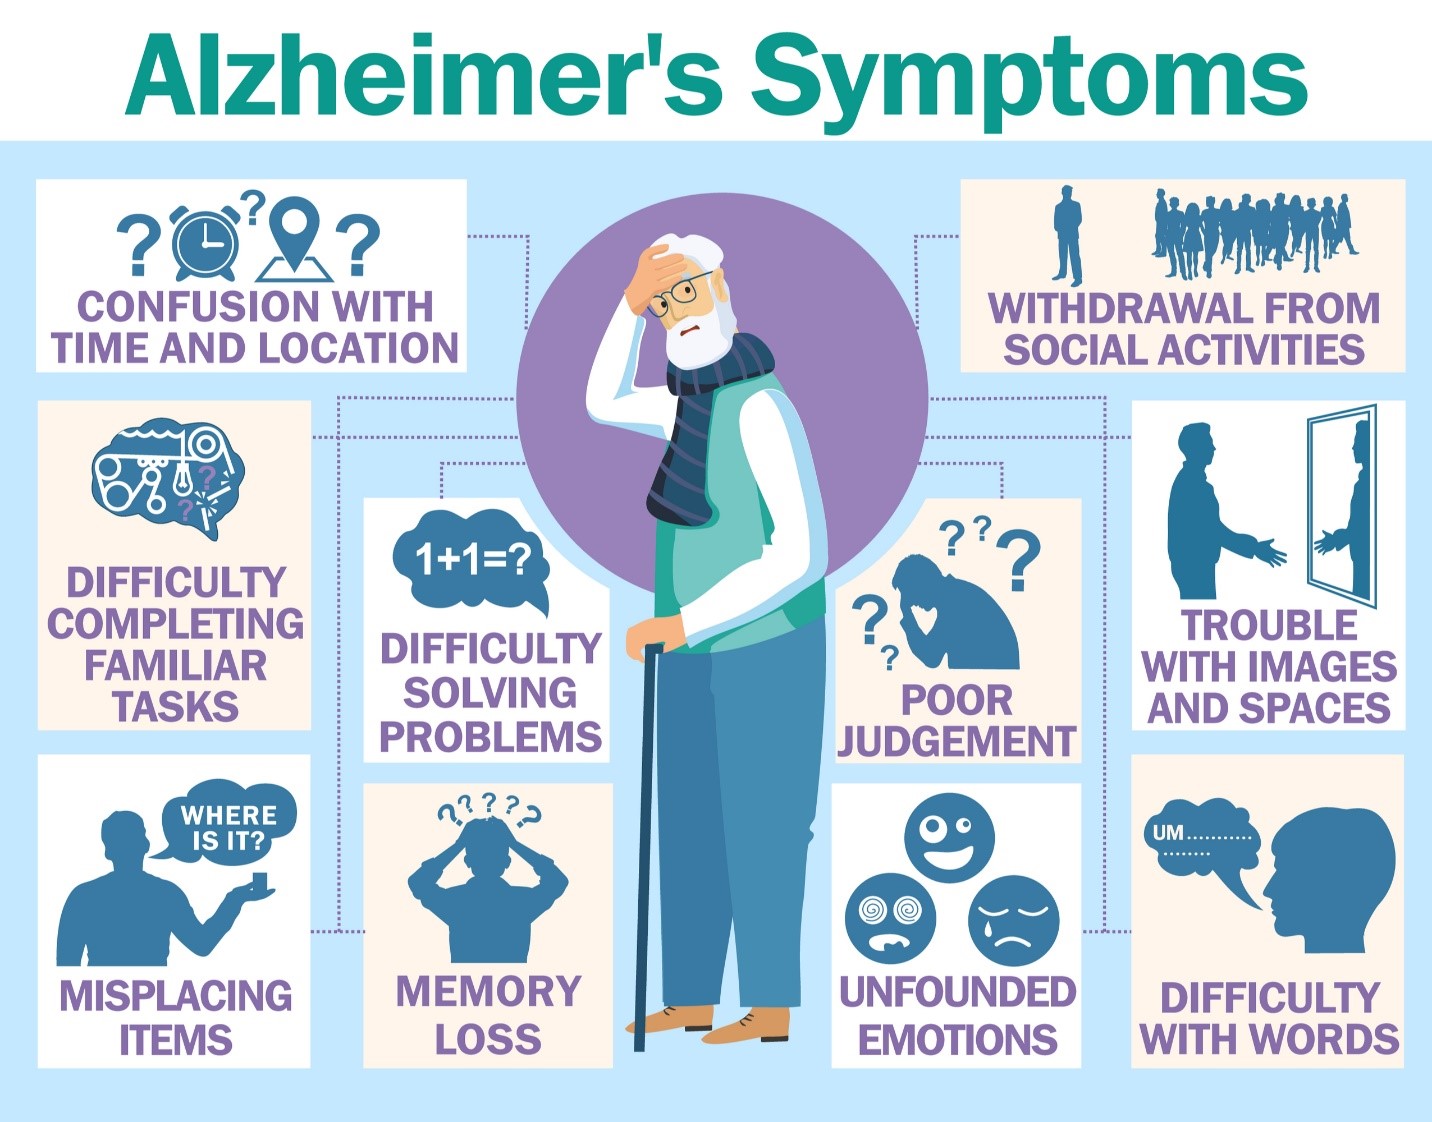 ALZHEIMER’S DISEASE AFFECTING THE AGED Ministry of Health, Wellness